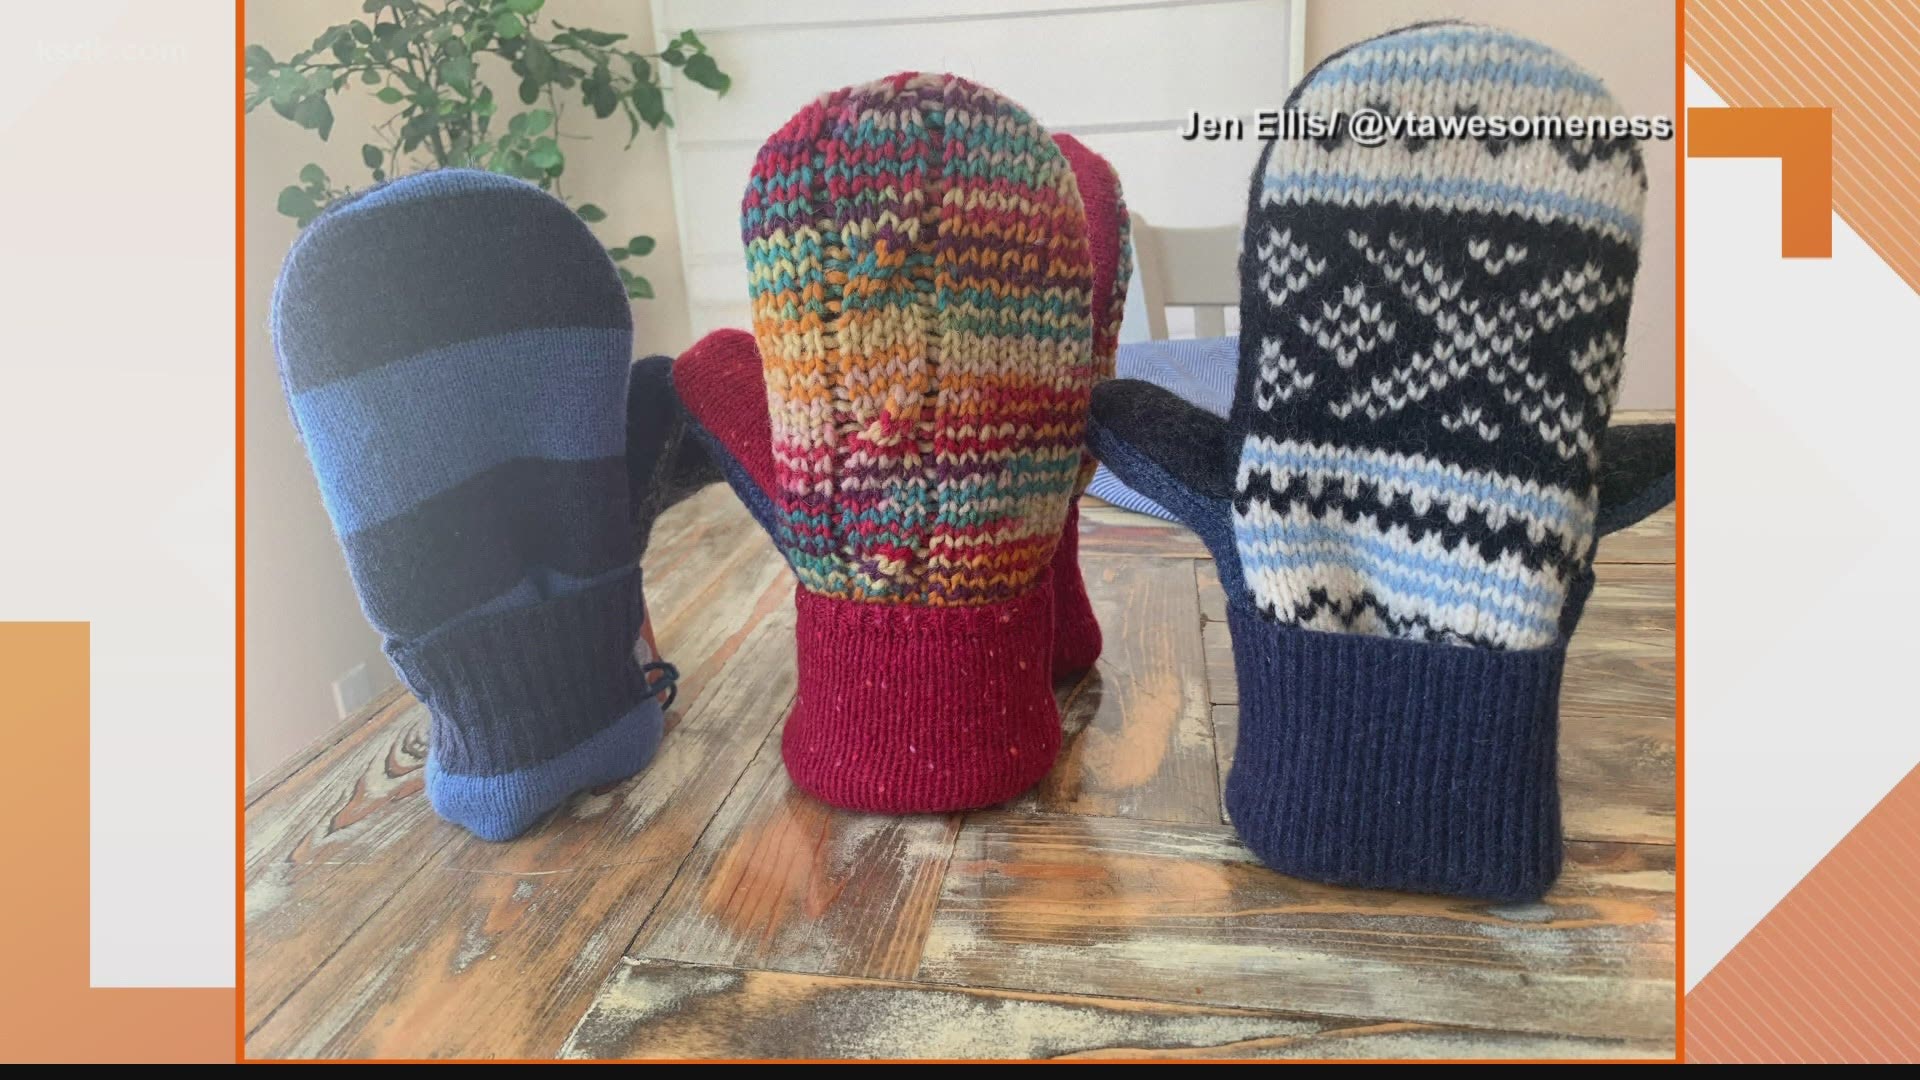 The Vermont teacher behind the now infamous mittens he wore made three more pairs and auctioned them off for charity